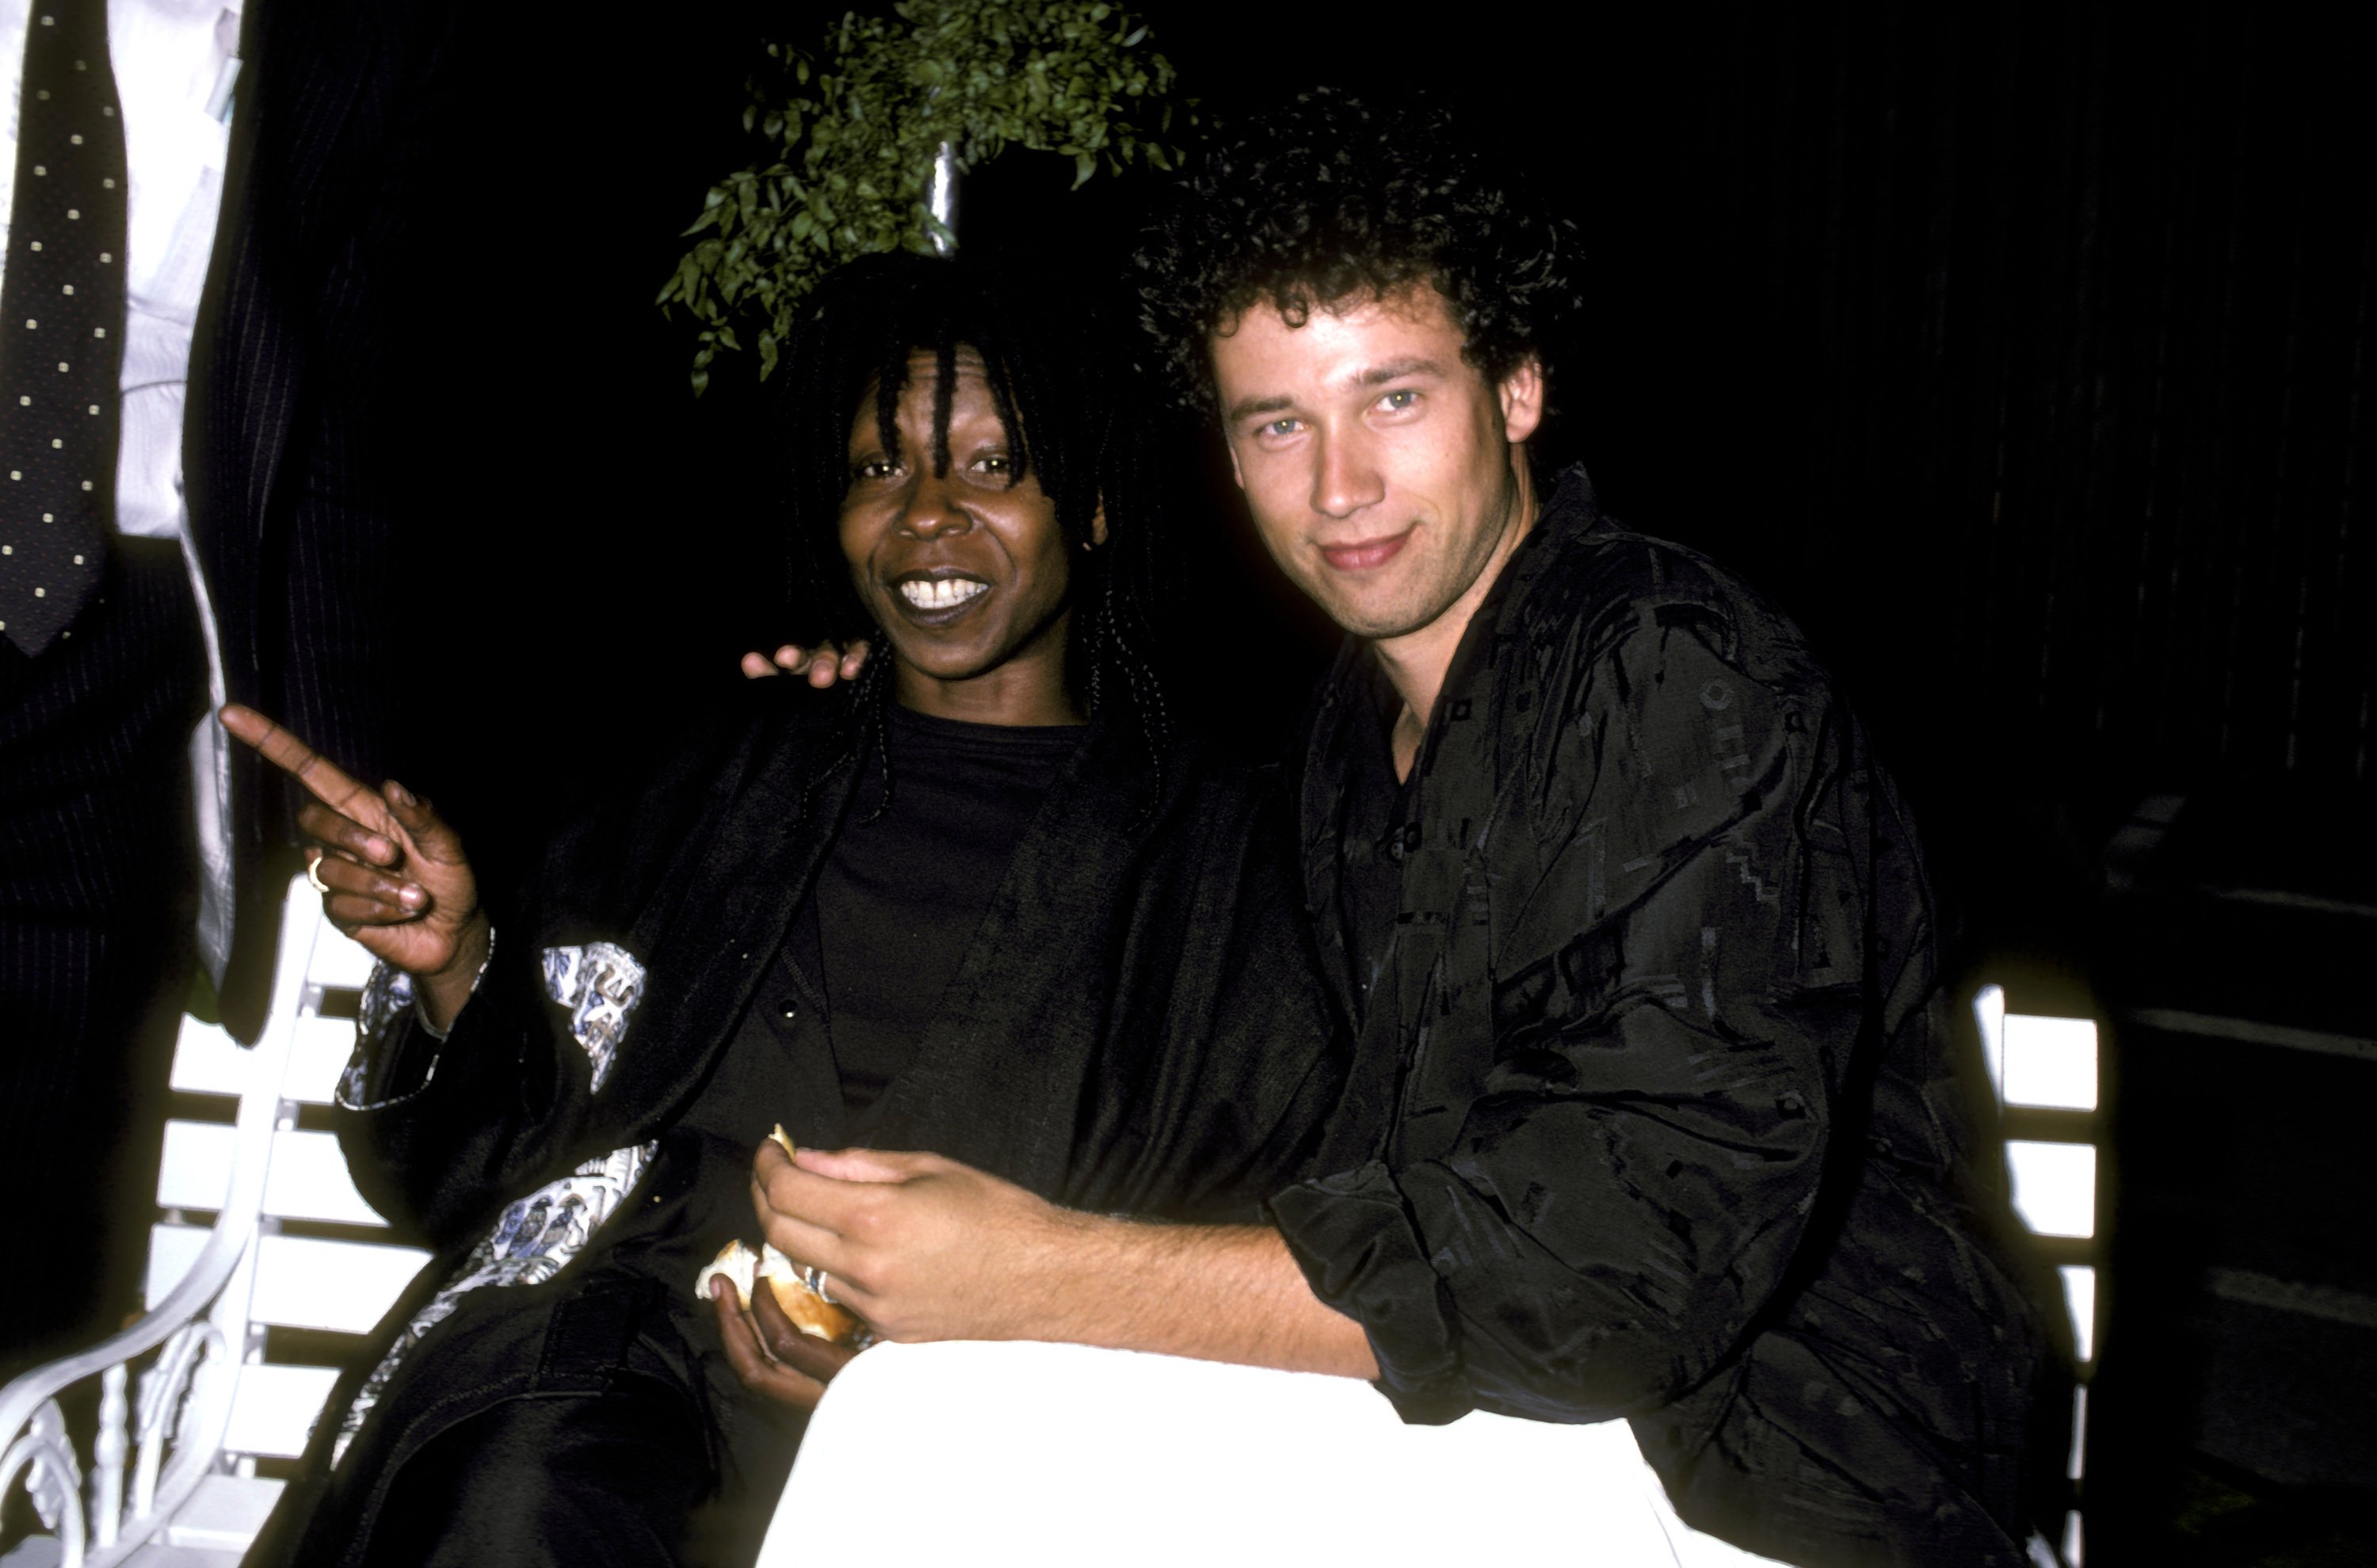 Whoopi Goldberg and husband David Claessen at the 5th Annual "L'Chaim, To Life!" Telethon, 1986 | Source: Getty Images